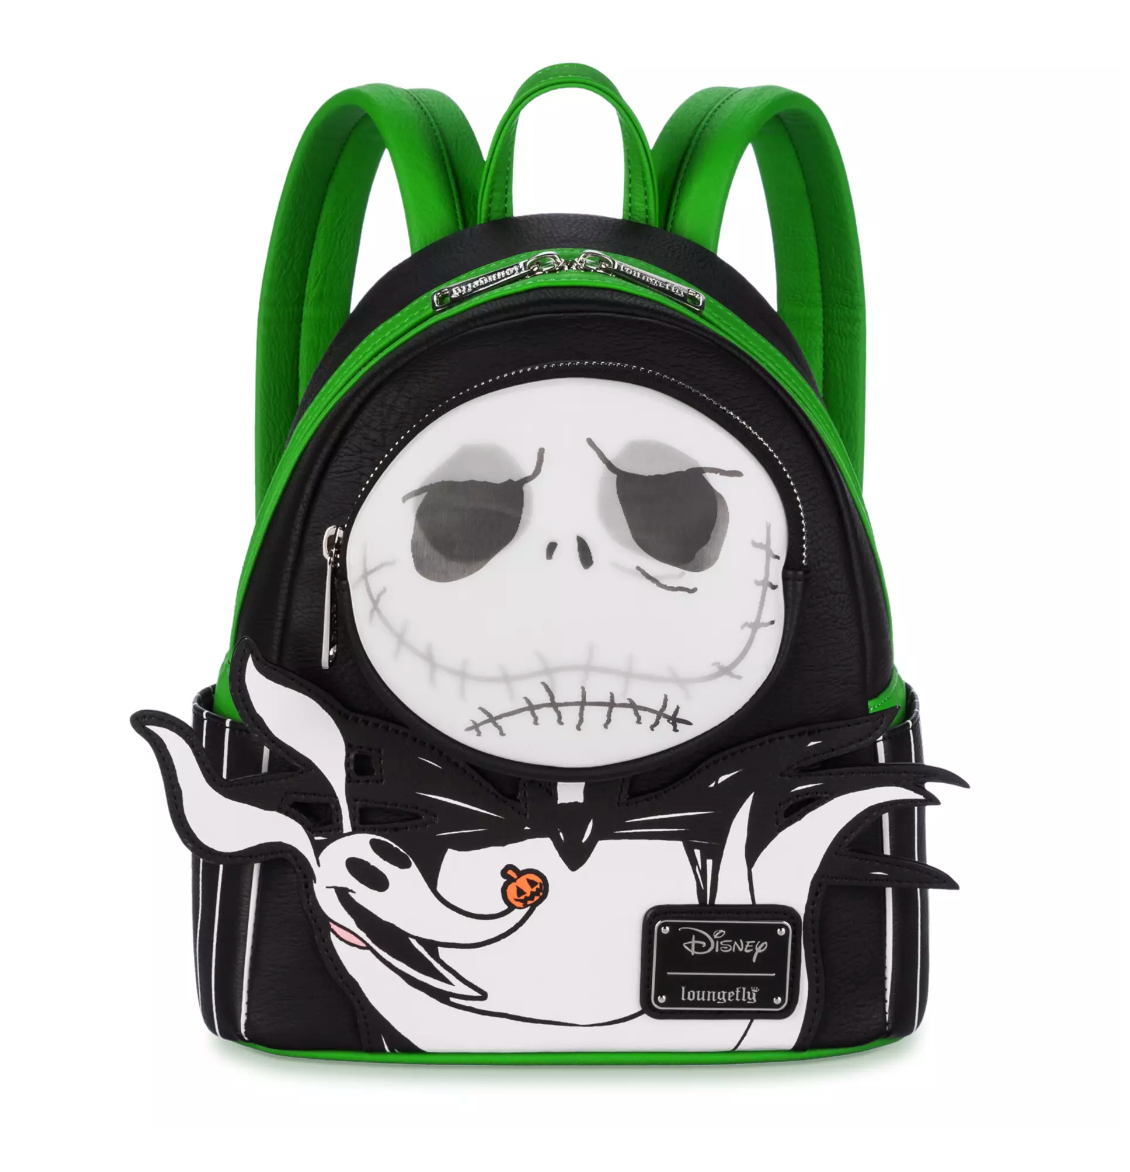 Disney Parks The Nightmare Before Christmas Jack Zero Loungefly Mini Backpack